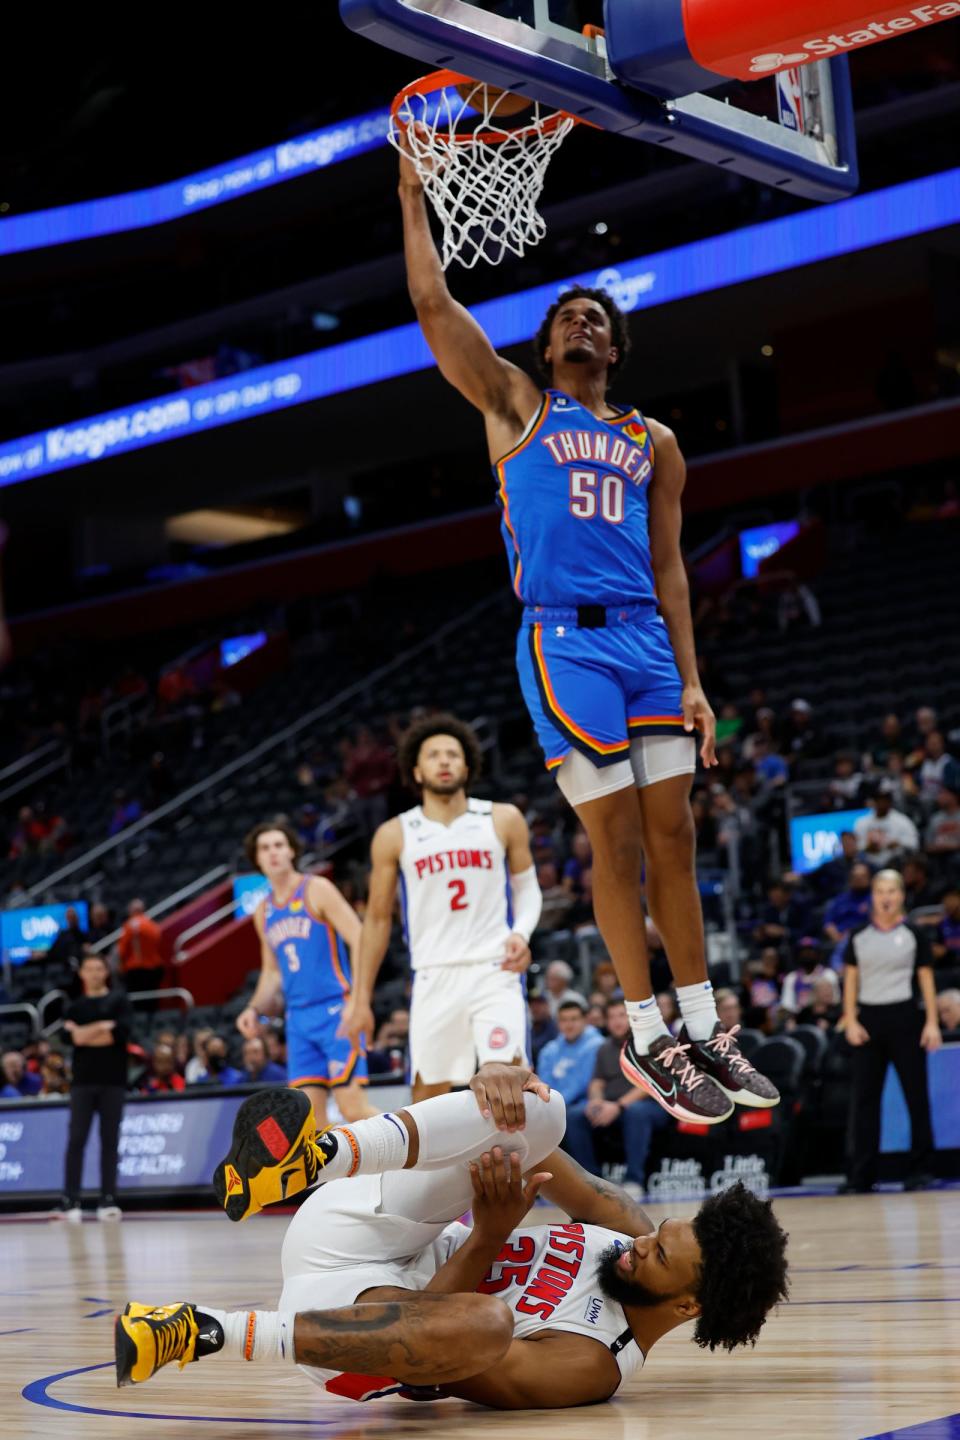 Pistons forward Marvin Bagley III grabs his knee and Thunder forward Jeremiah Robinson-Earl dunks in the first half of the preseason game on Tuesday, Oct. 11, 2022, at Little Caesars Arena.